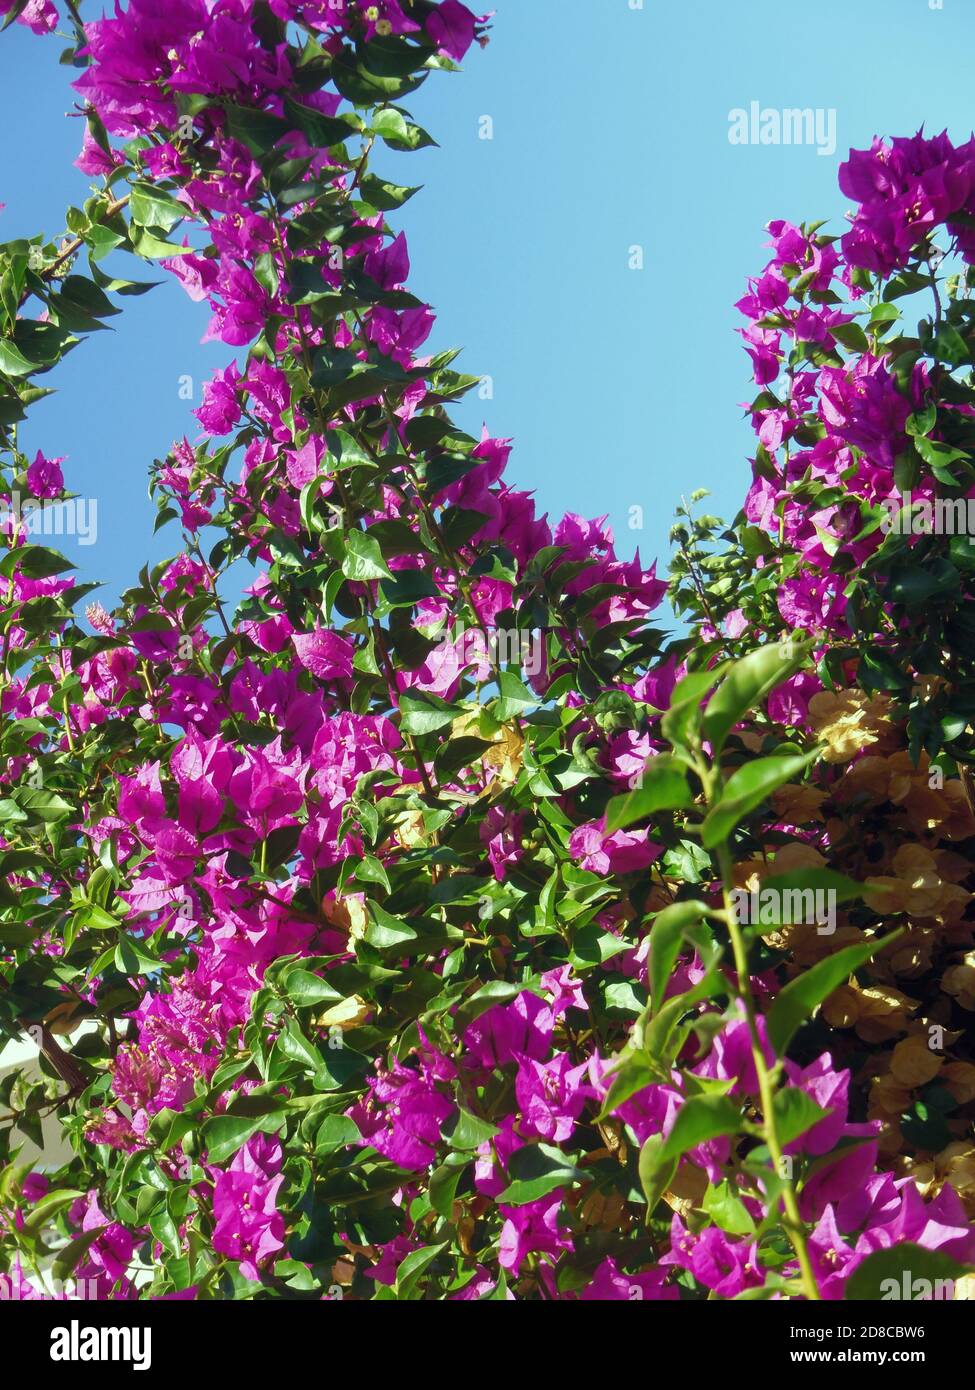 Vibrant coloured bracts of Bougainvillea tropical climbing plant 'Pouttonic special' Stock Photo